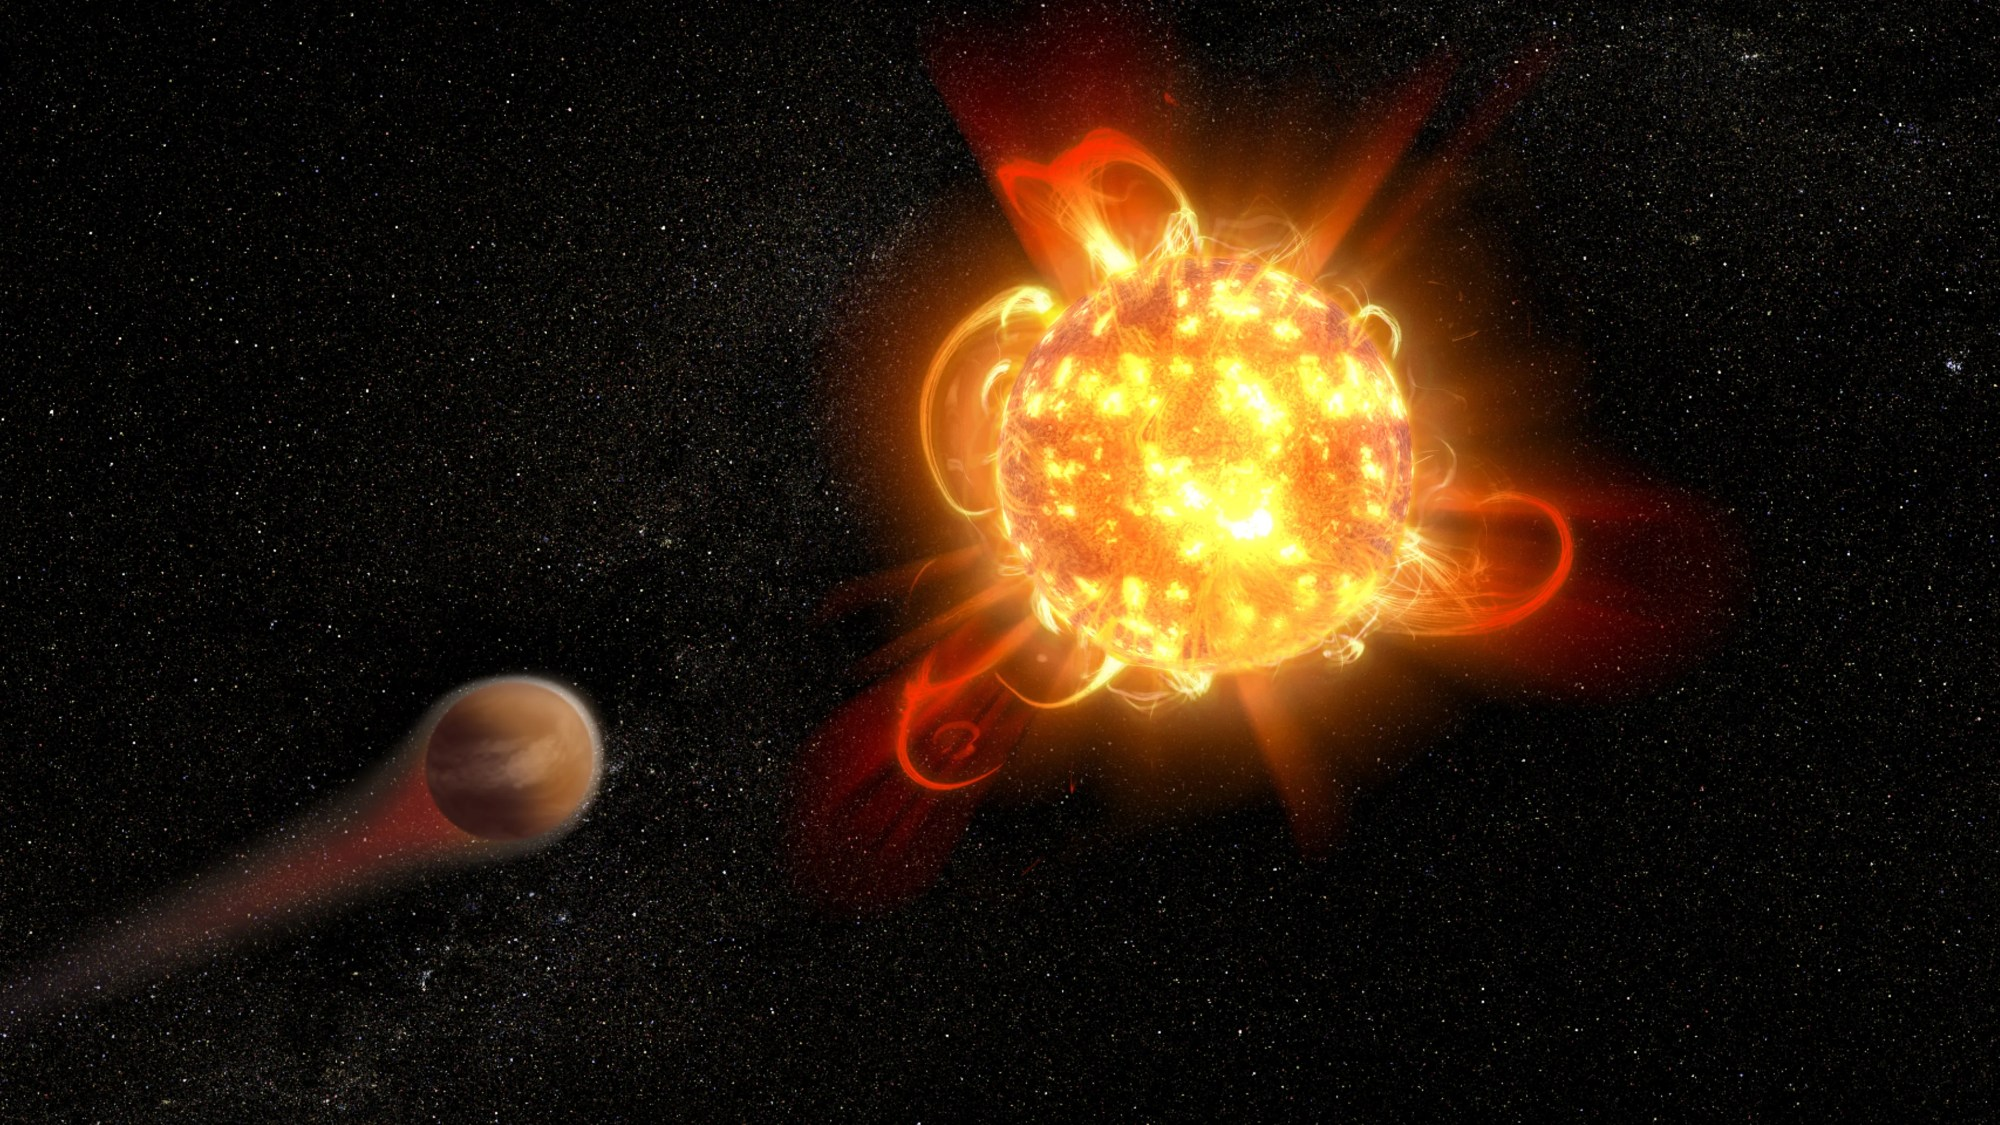 artist's sketch of red dwarf and steaming planet